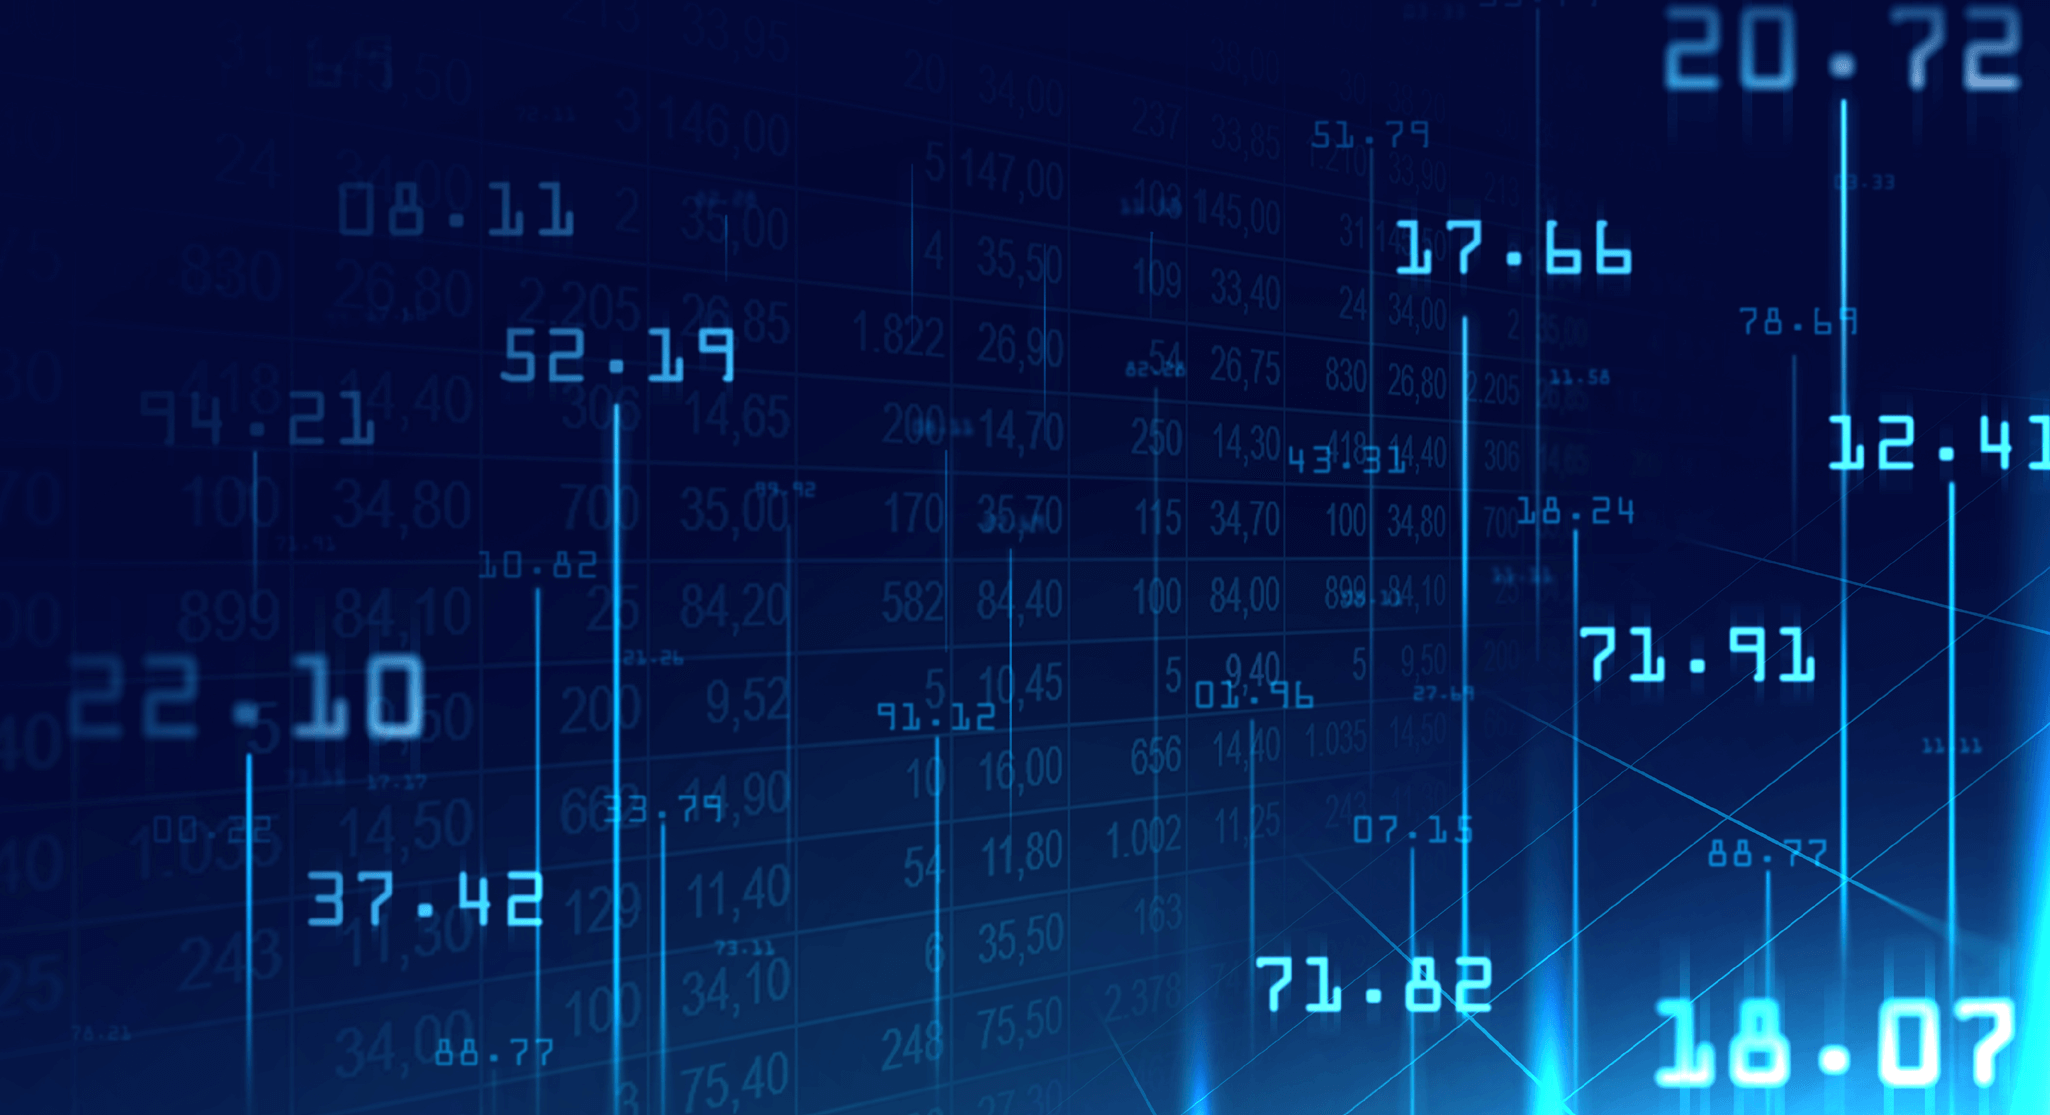 Algorithmic trading – monitoring and management